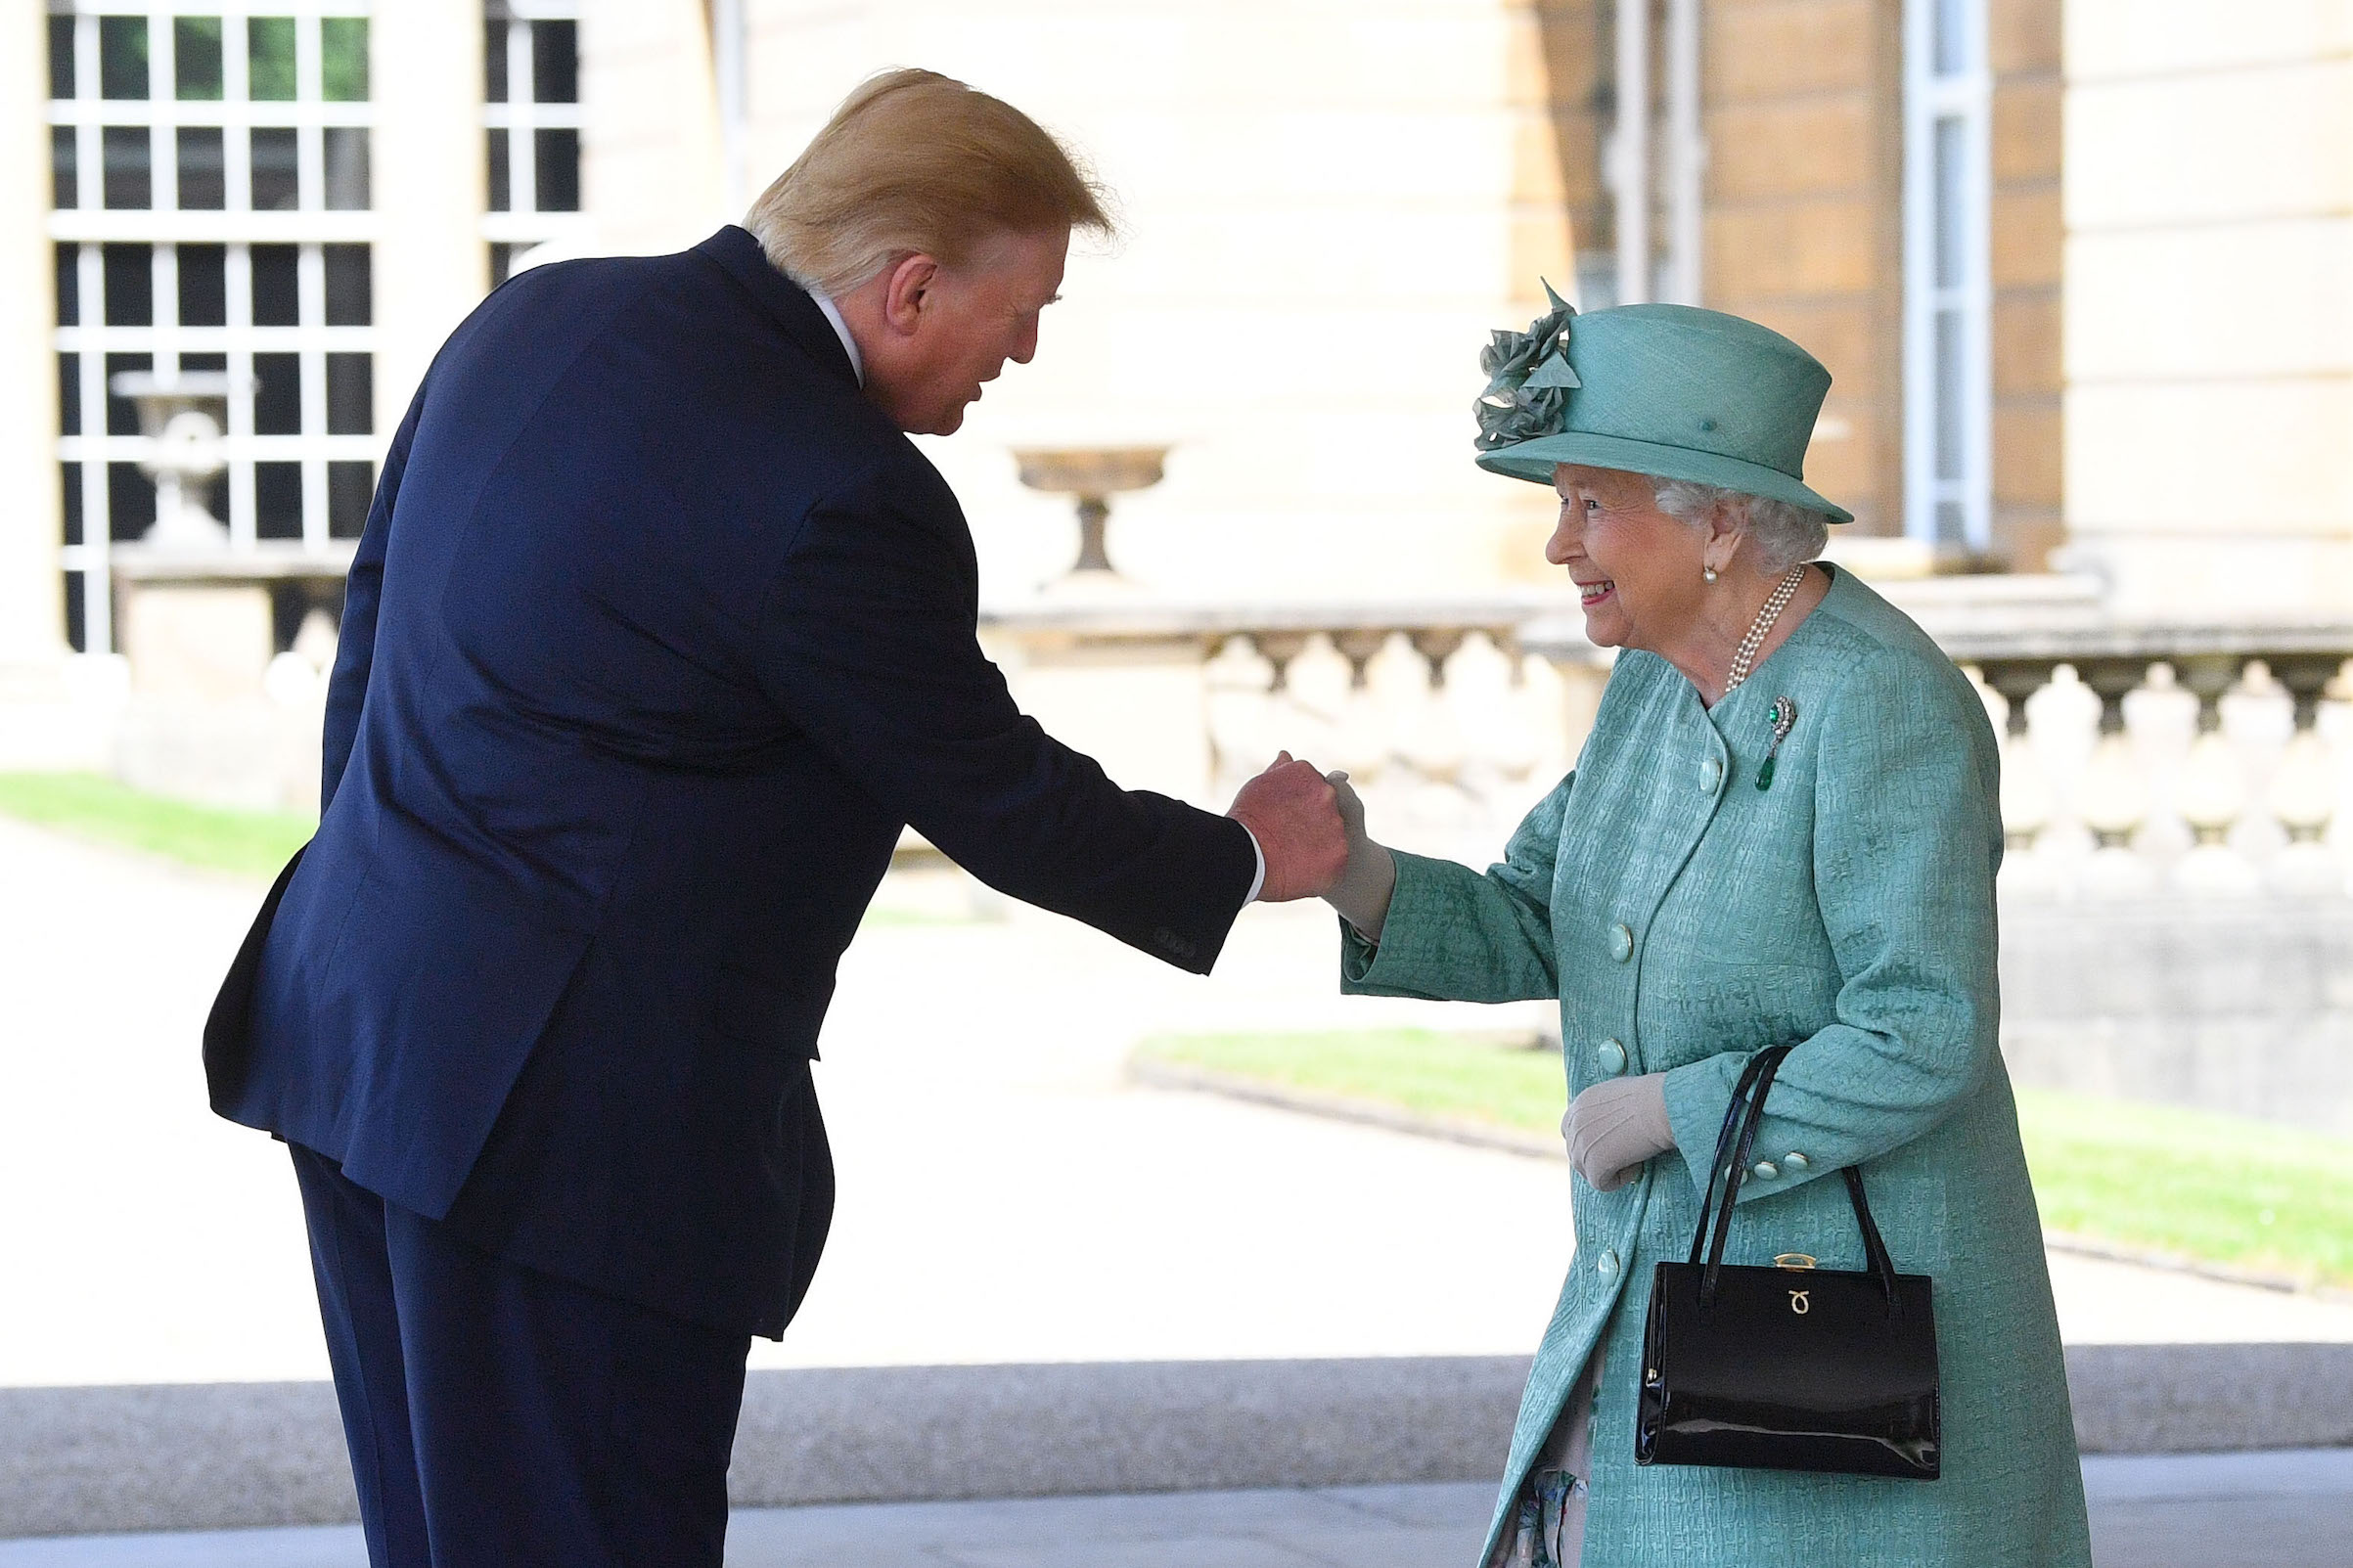 Queen Elizabeth II greets US President Donald Trump as he arrives for the Ceremonial Welcome at Buckingham Palace, London, on day one of his three day state visit to the U.K. on June 3, 2019. (Victoria Jones—Getty Images)